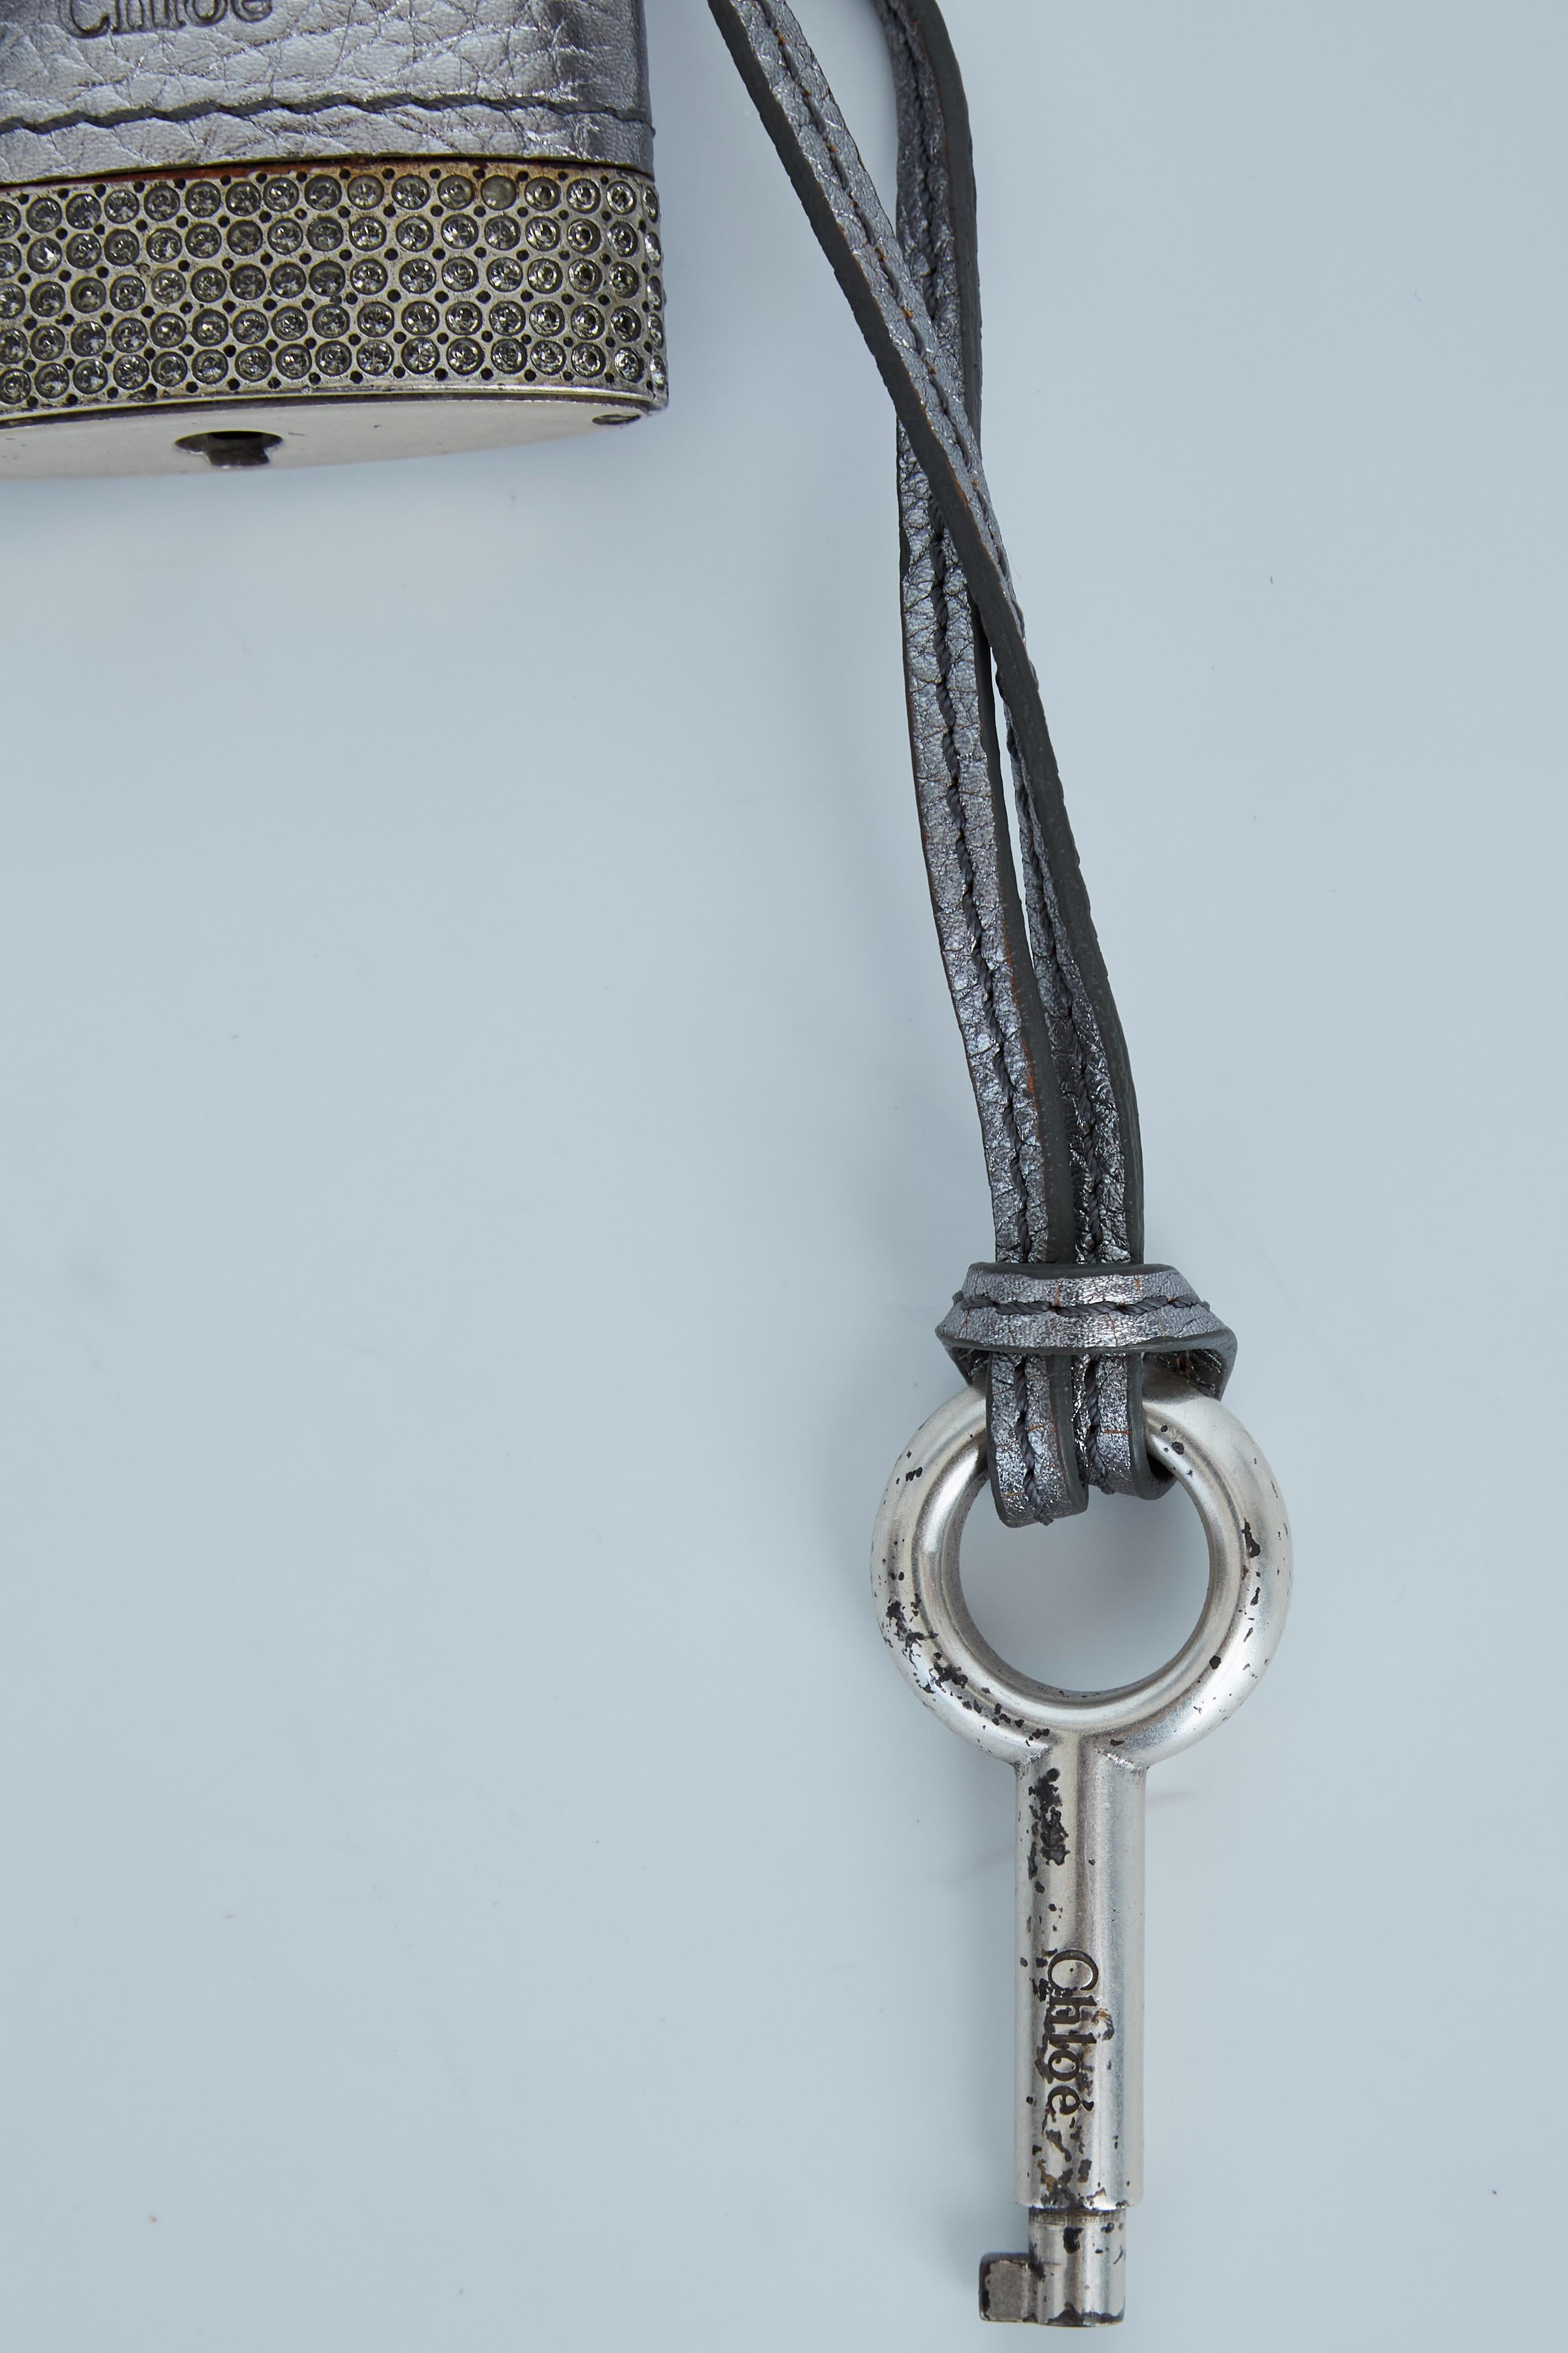 Color: Silver tone
Material: Metal and leather
Measurements: Length 2” x Width 3.5” (Padlock)
Comes with: Box
Condition: Good: faint hairline scratches throughout, scuff marks, tarnish, rust.